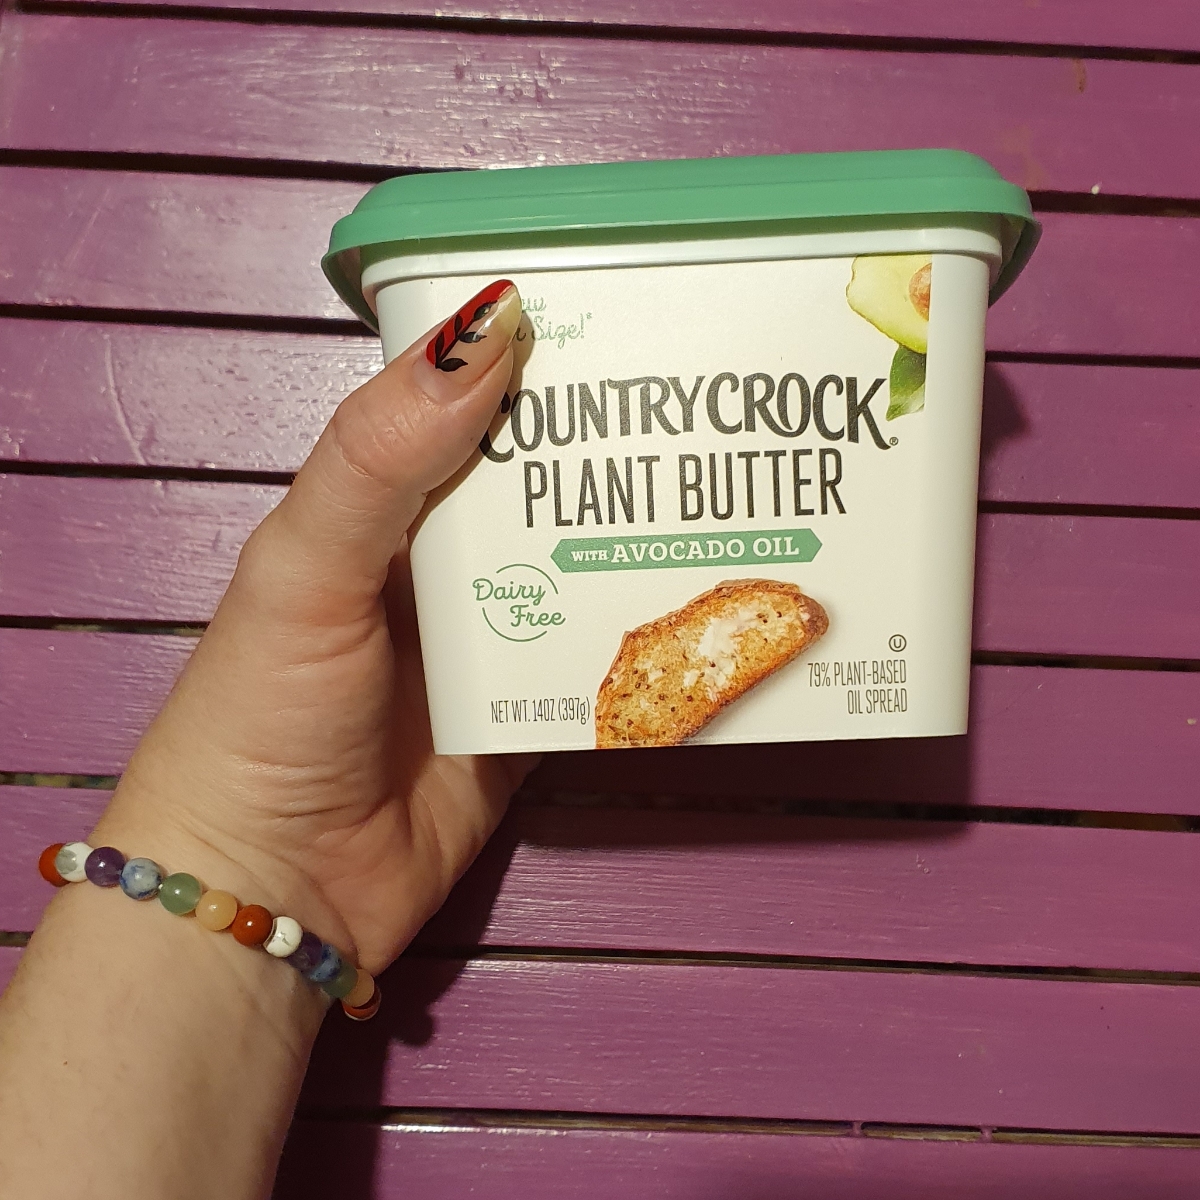 Country Crock Plant Butter Sticks with Avocado Oil